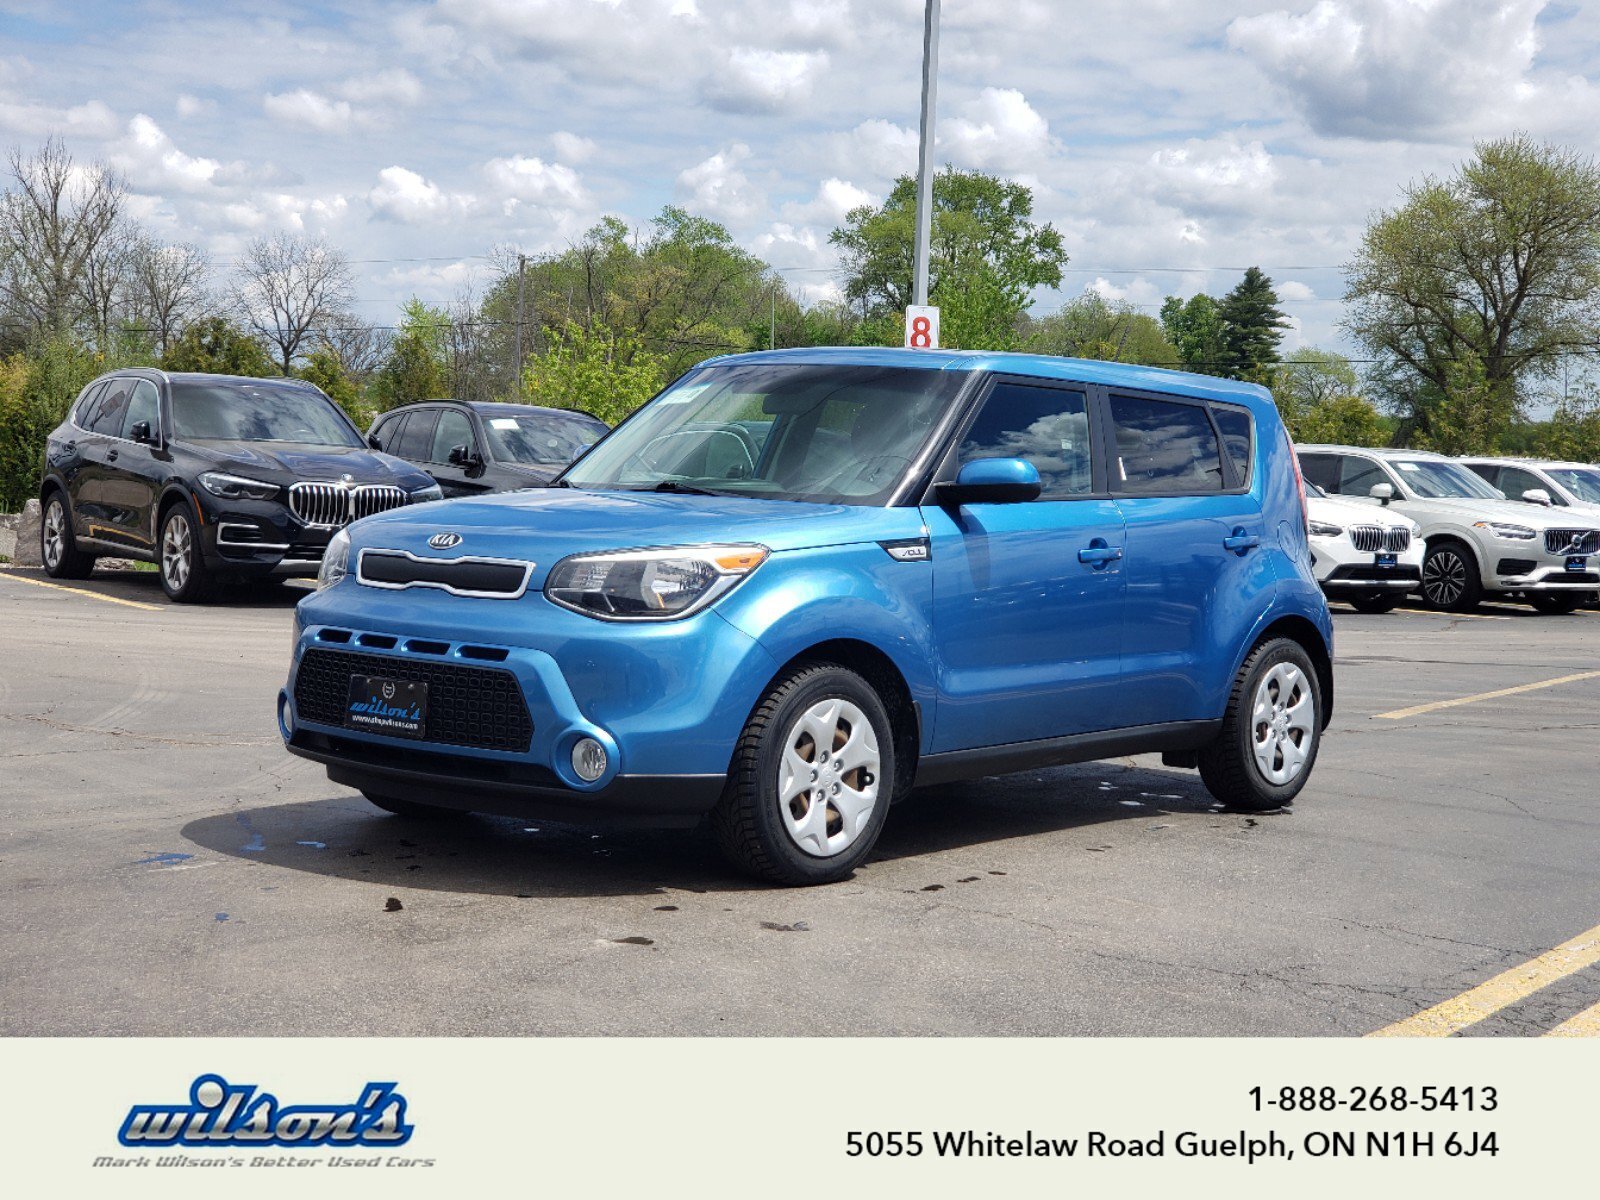 2015 Kia Soul LX, Auto, Power Group, A/C, Cruise, and more!